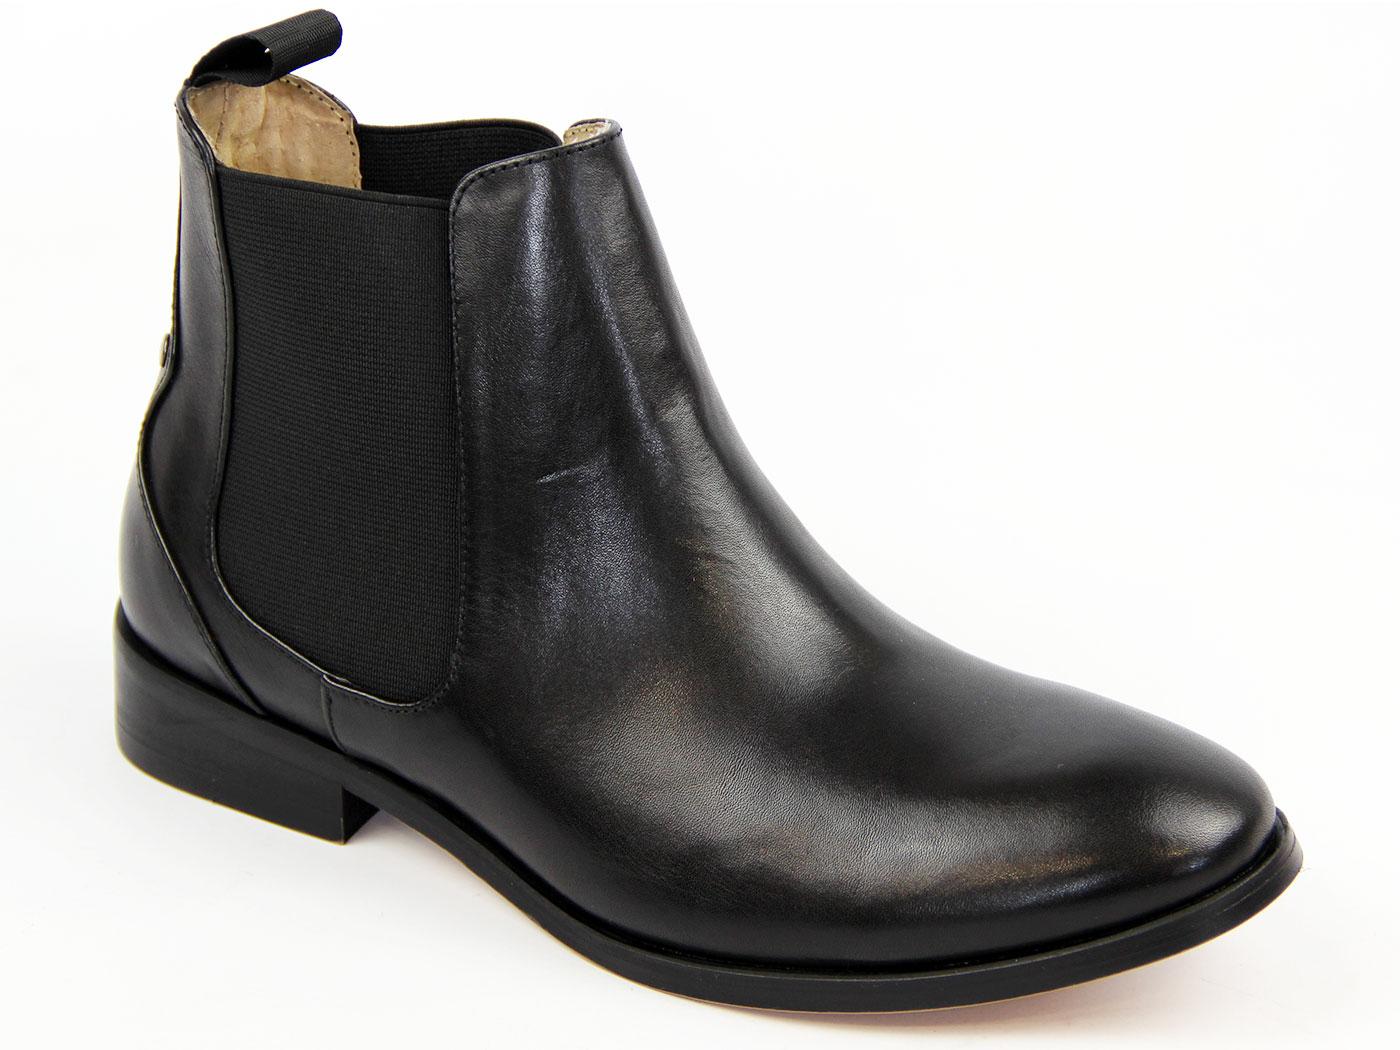 LACEYS Odele Gusset Retro 60s Mod Chelsea Boots in Black